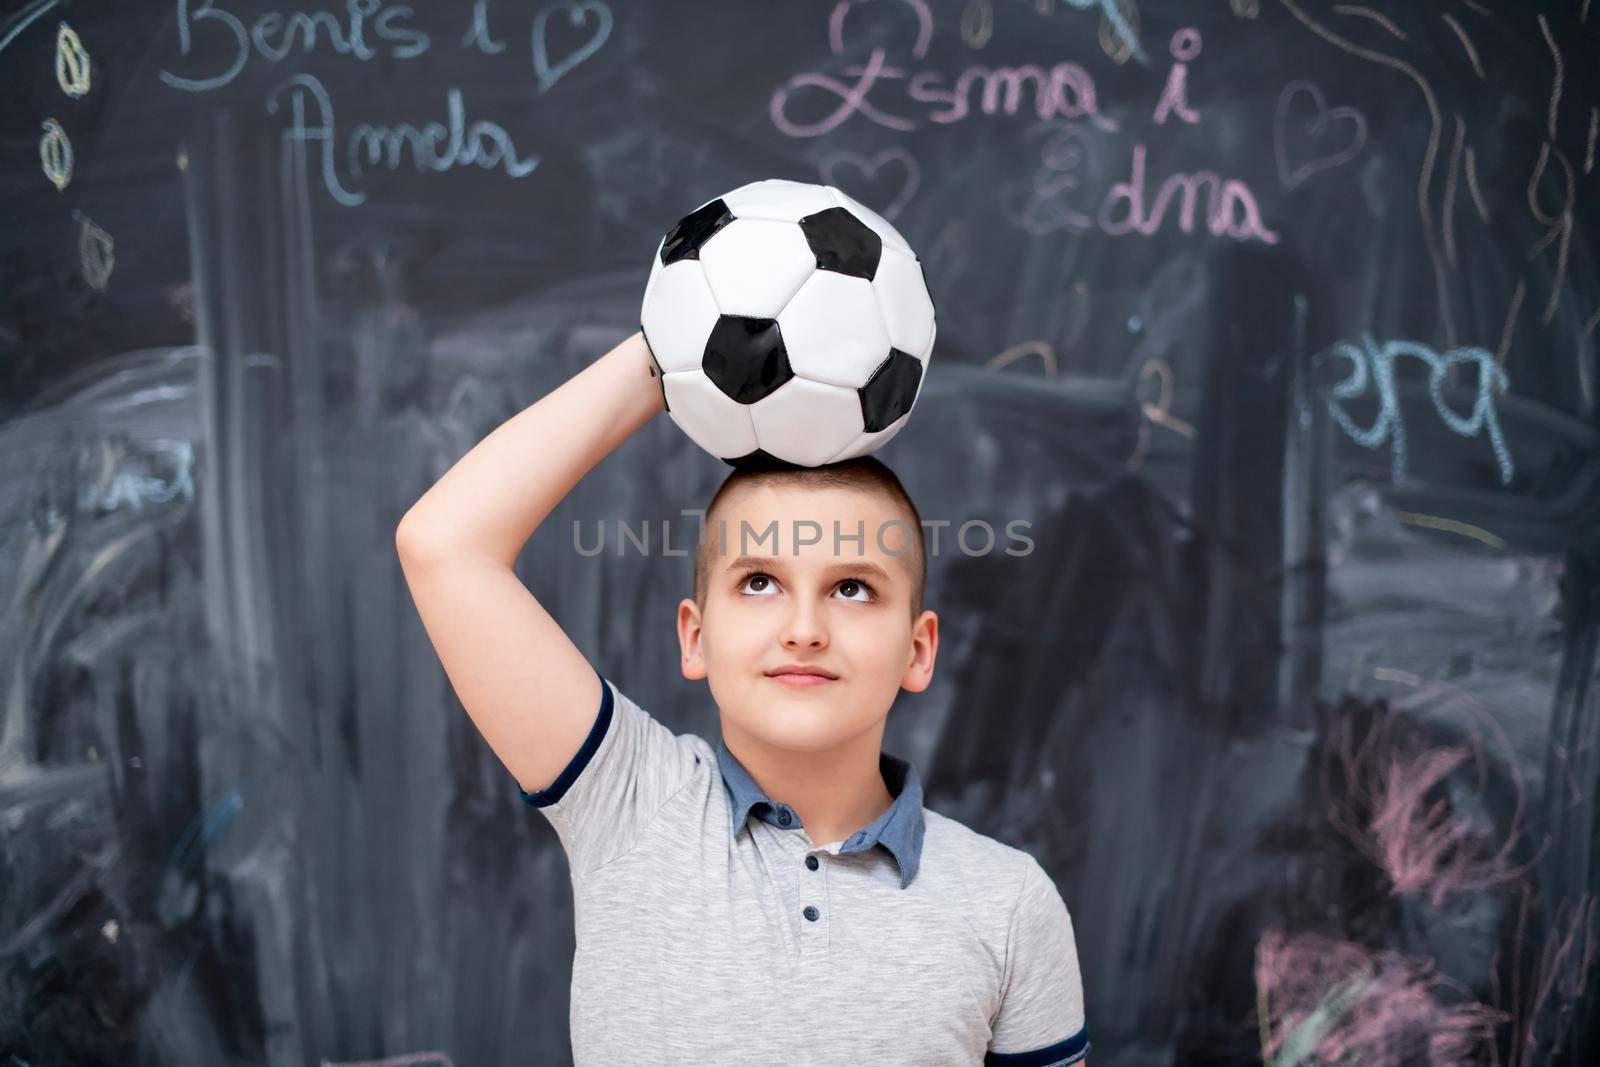 portrait of happy cute boy having fun holding a soccer ball on his head while standing in front of black chalkboard